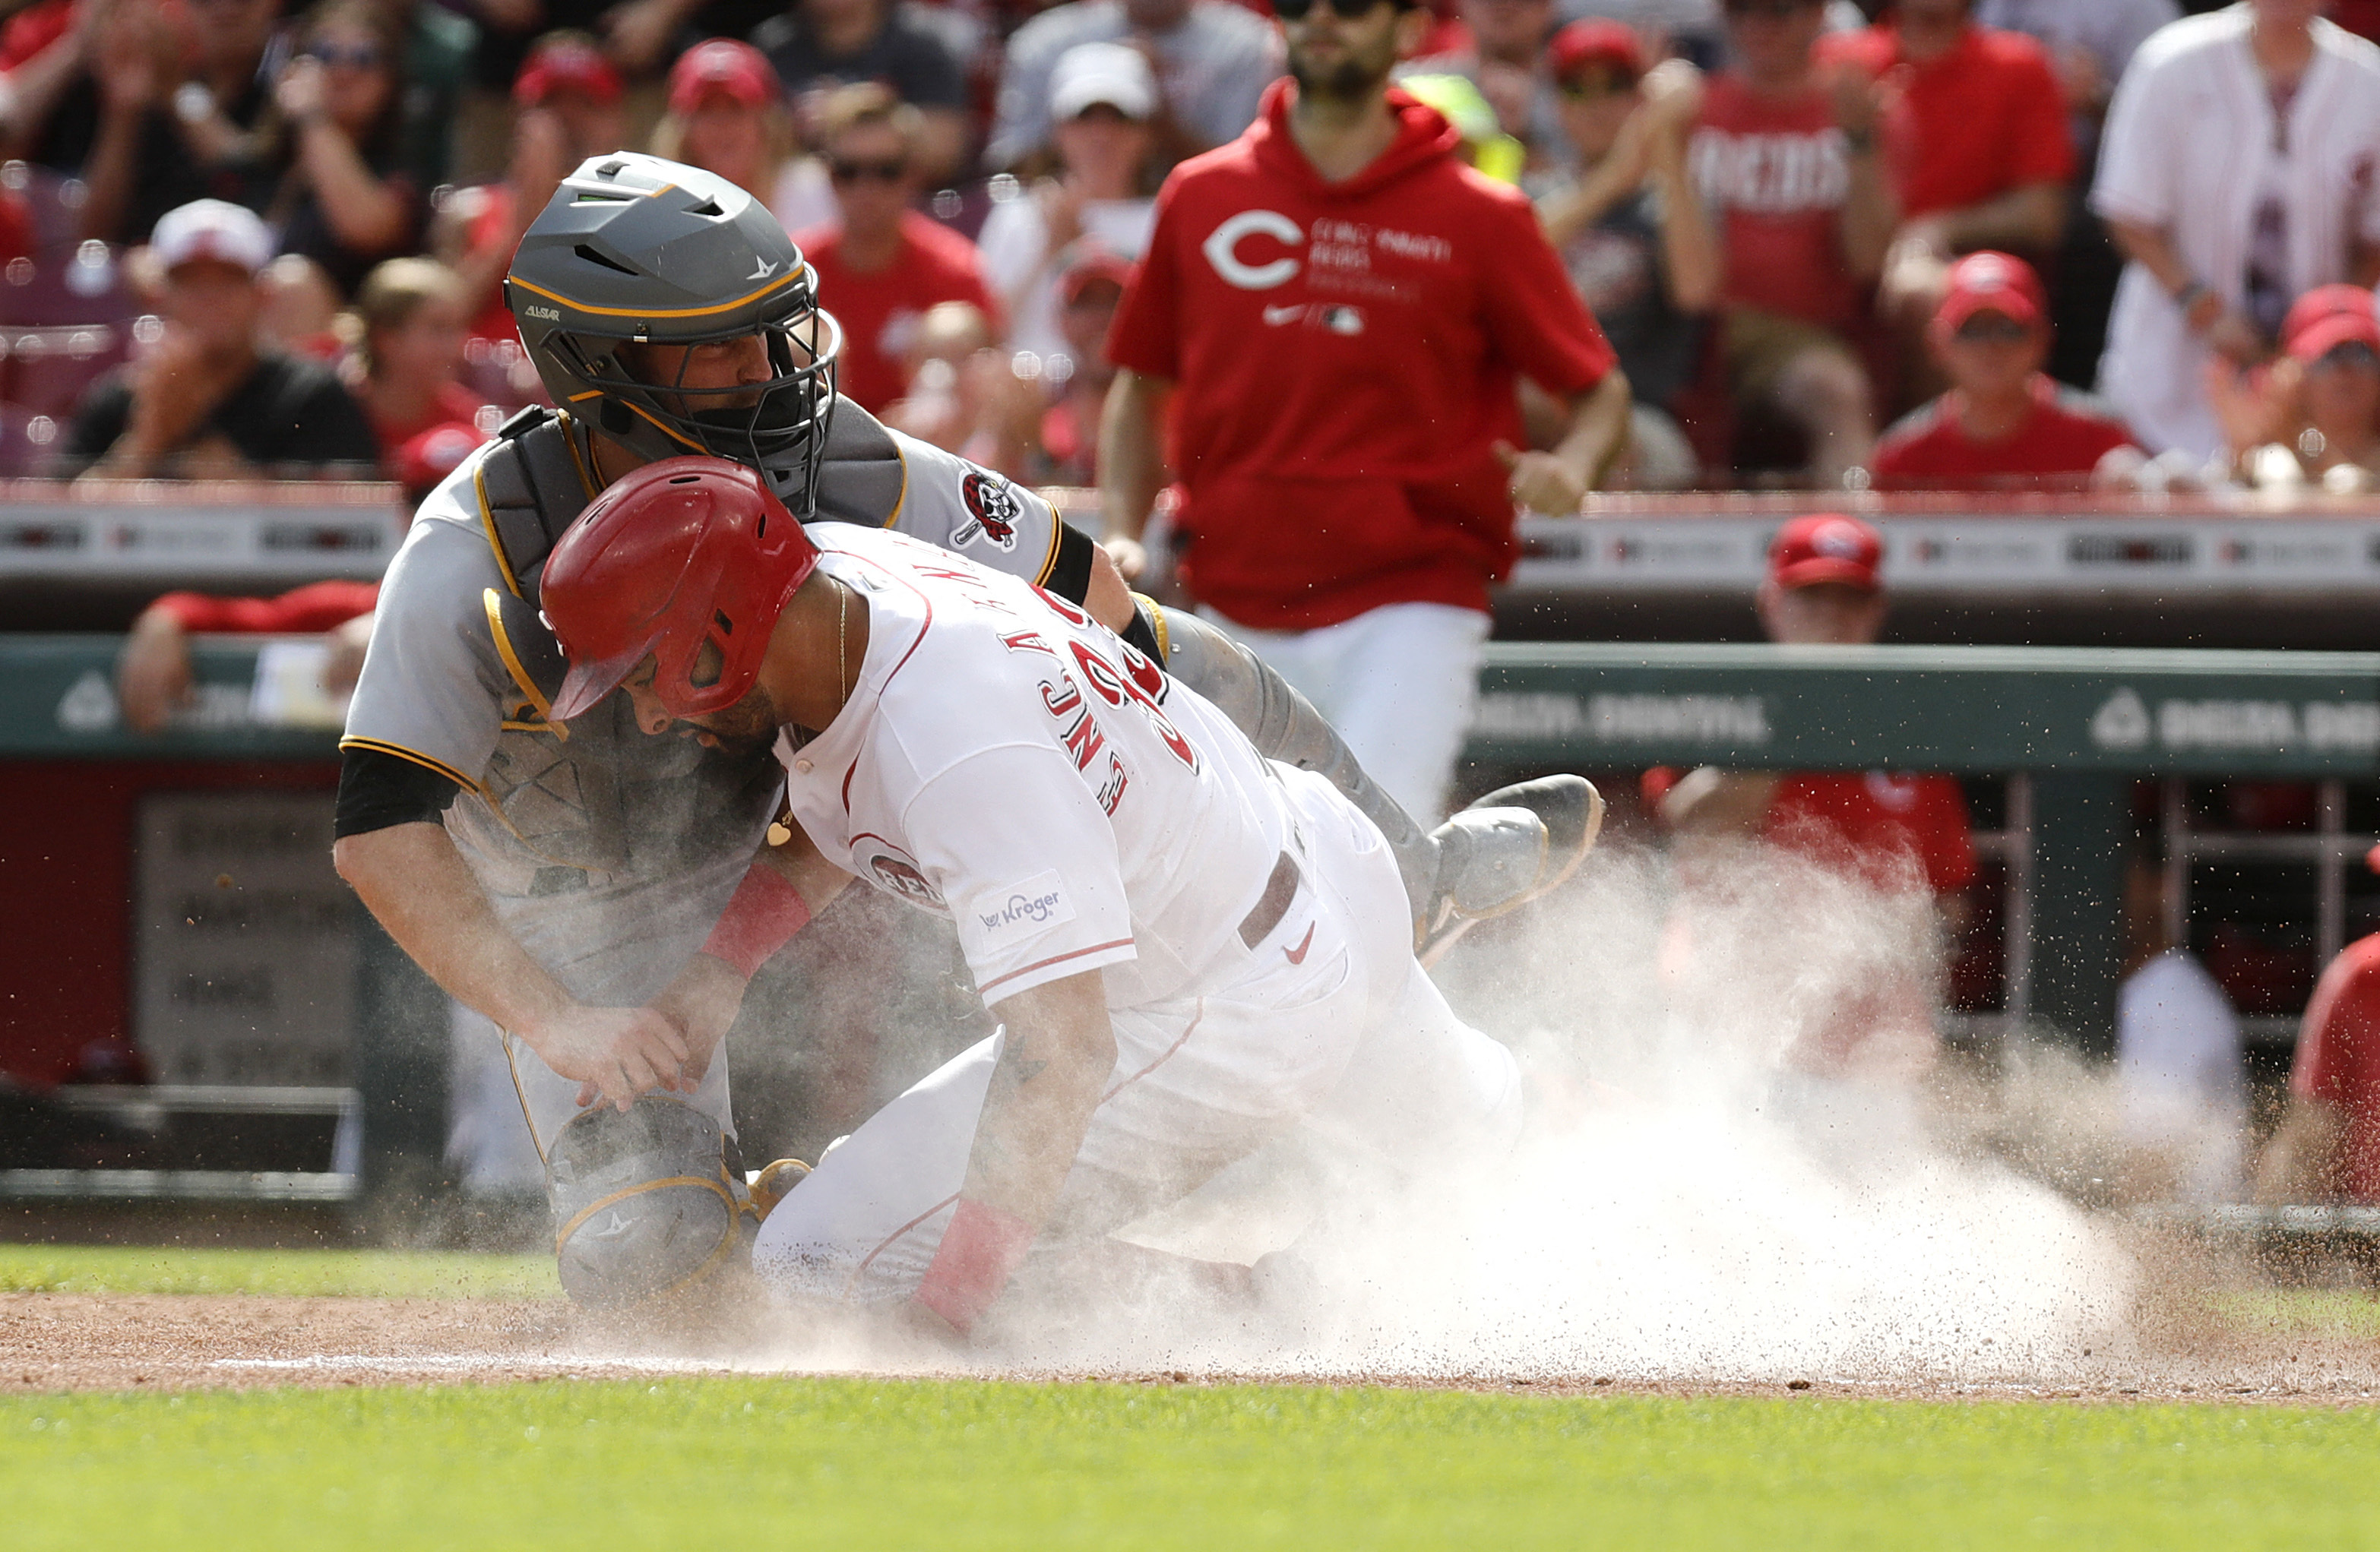 Reds rally to knock off Pirates, 4-2